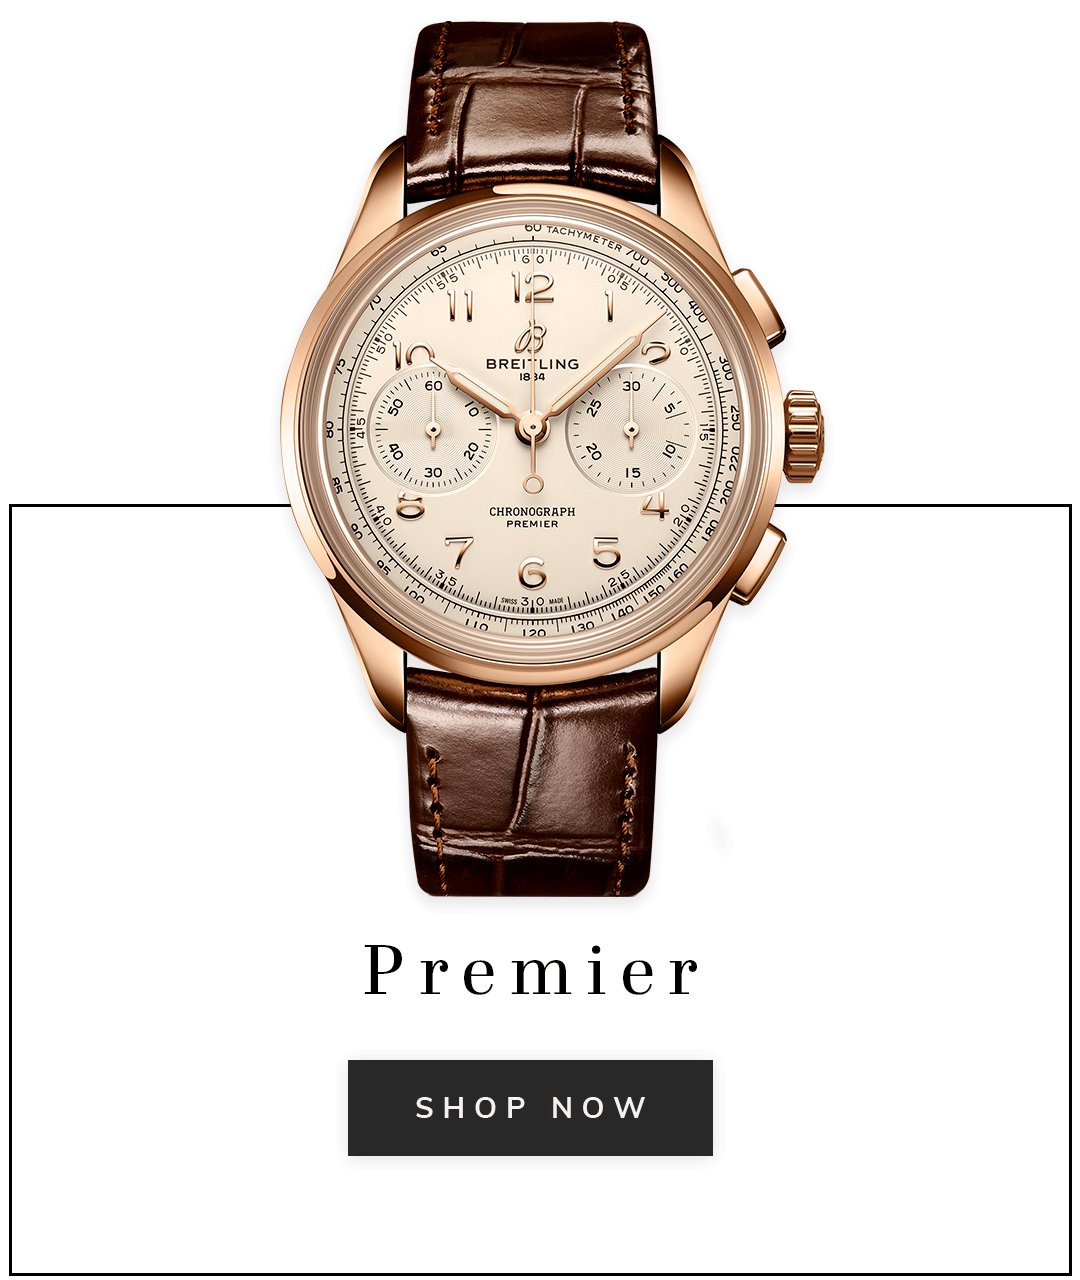 A Breitling Premier watch with text shop now